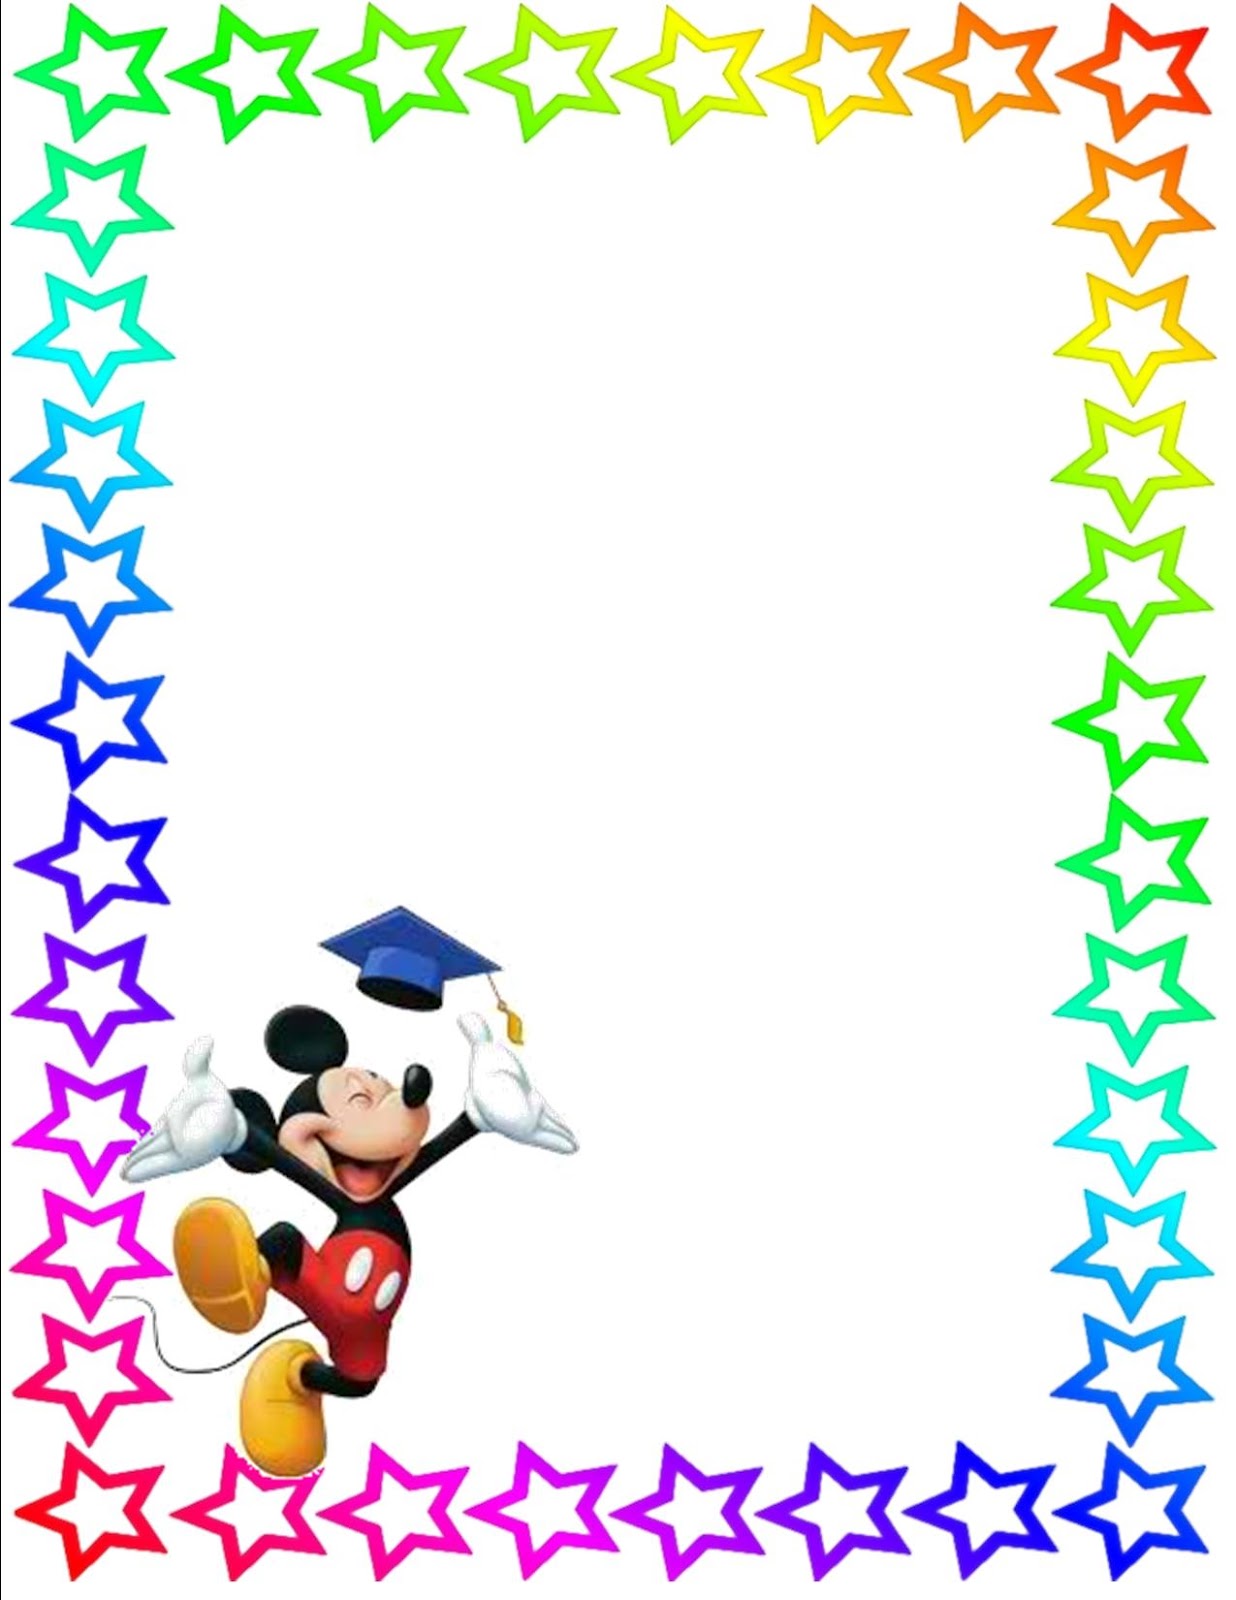 downloadable clipart for free - photo #37